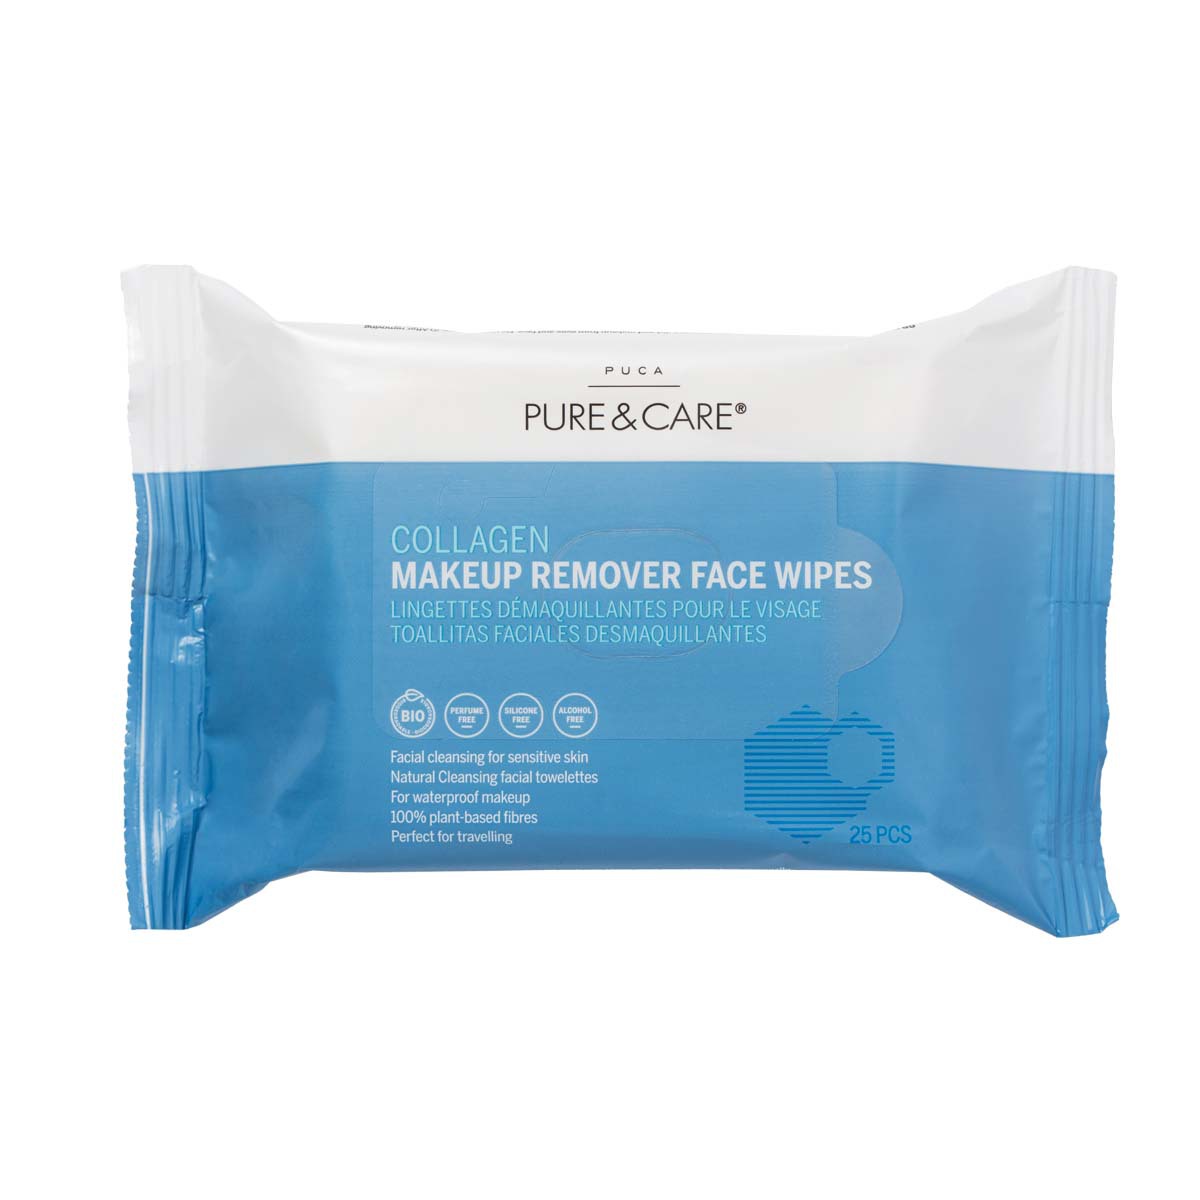 Collagen Perfum free Makeup Cleansing Wipes | PUCA - PURE & CARE